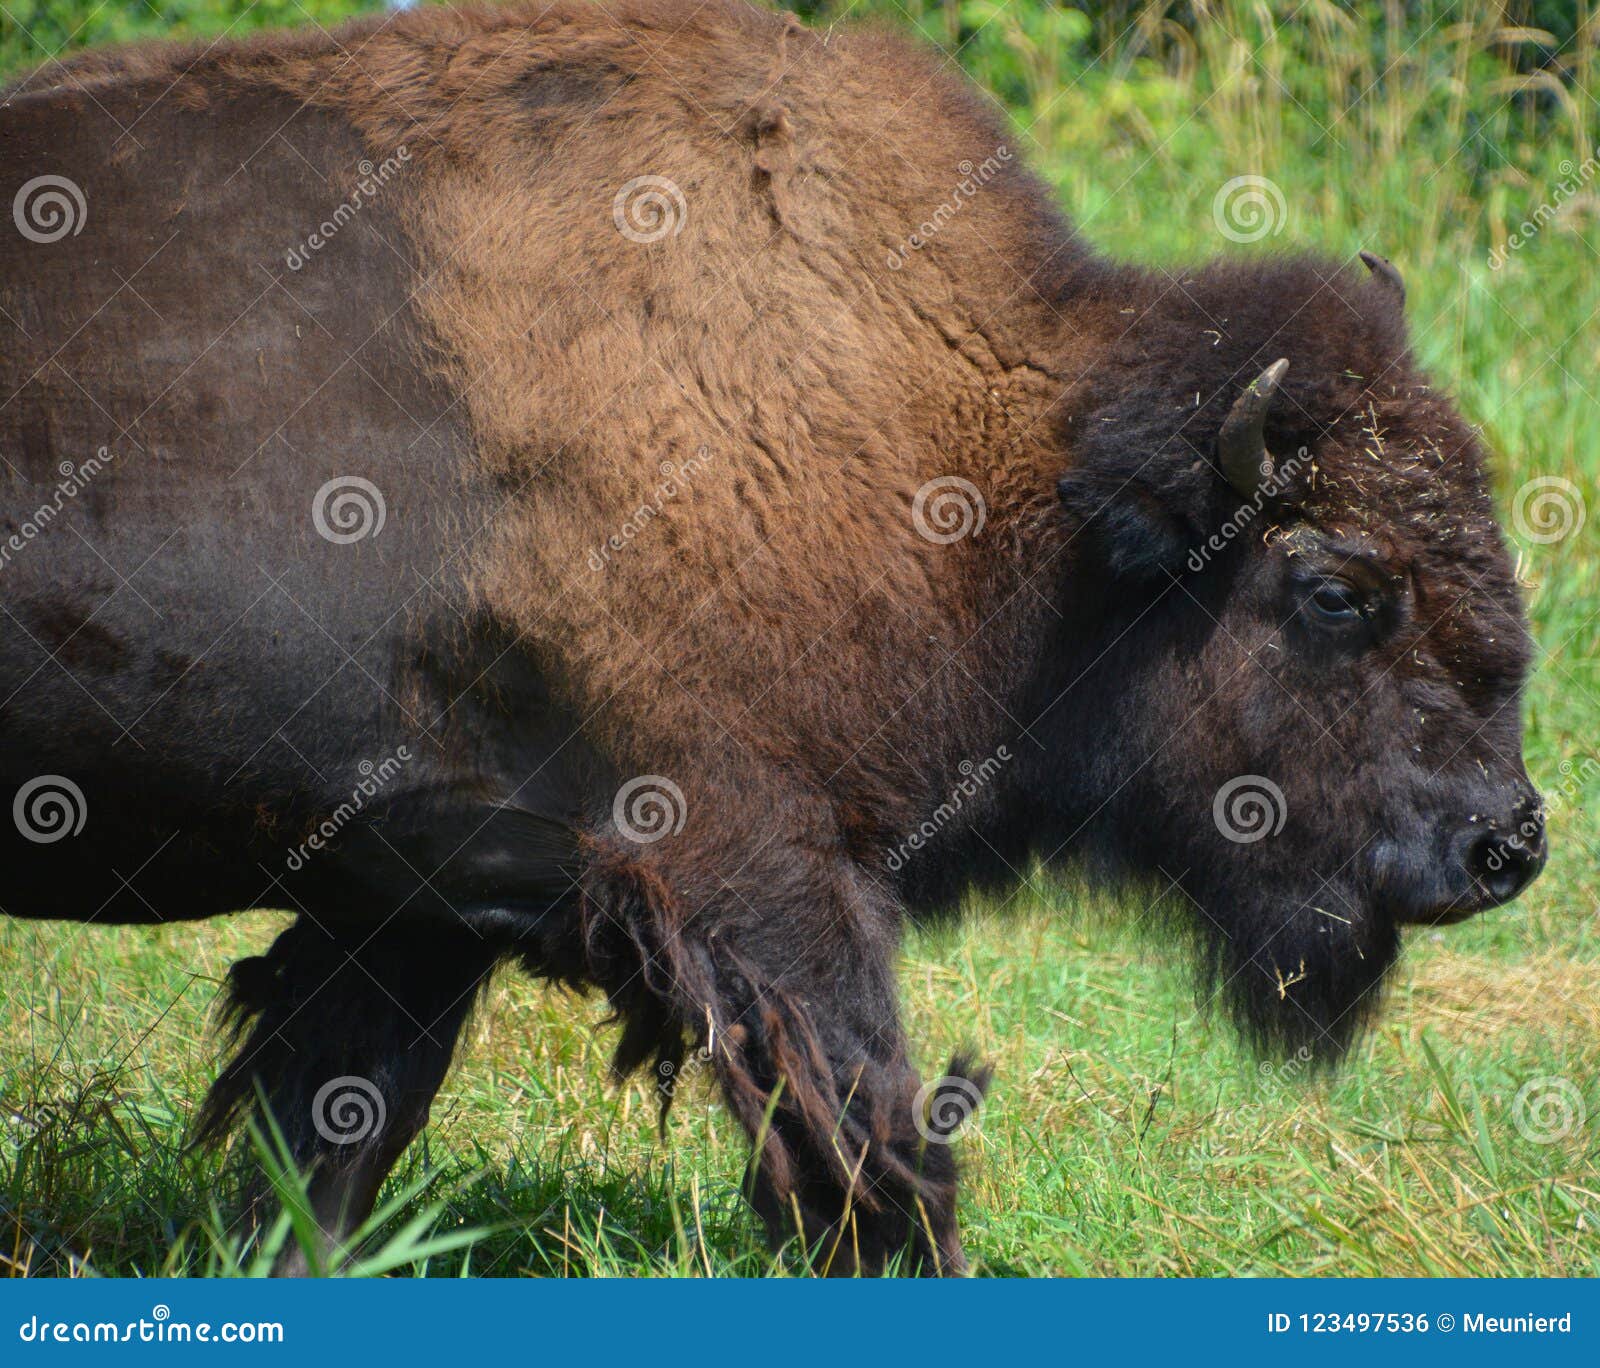 bison are large, even-toed ungulates